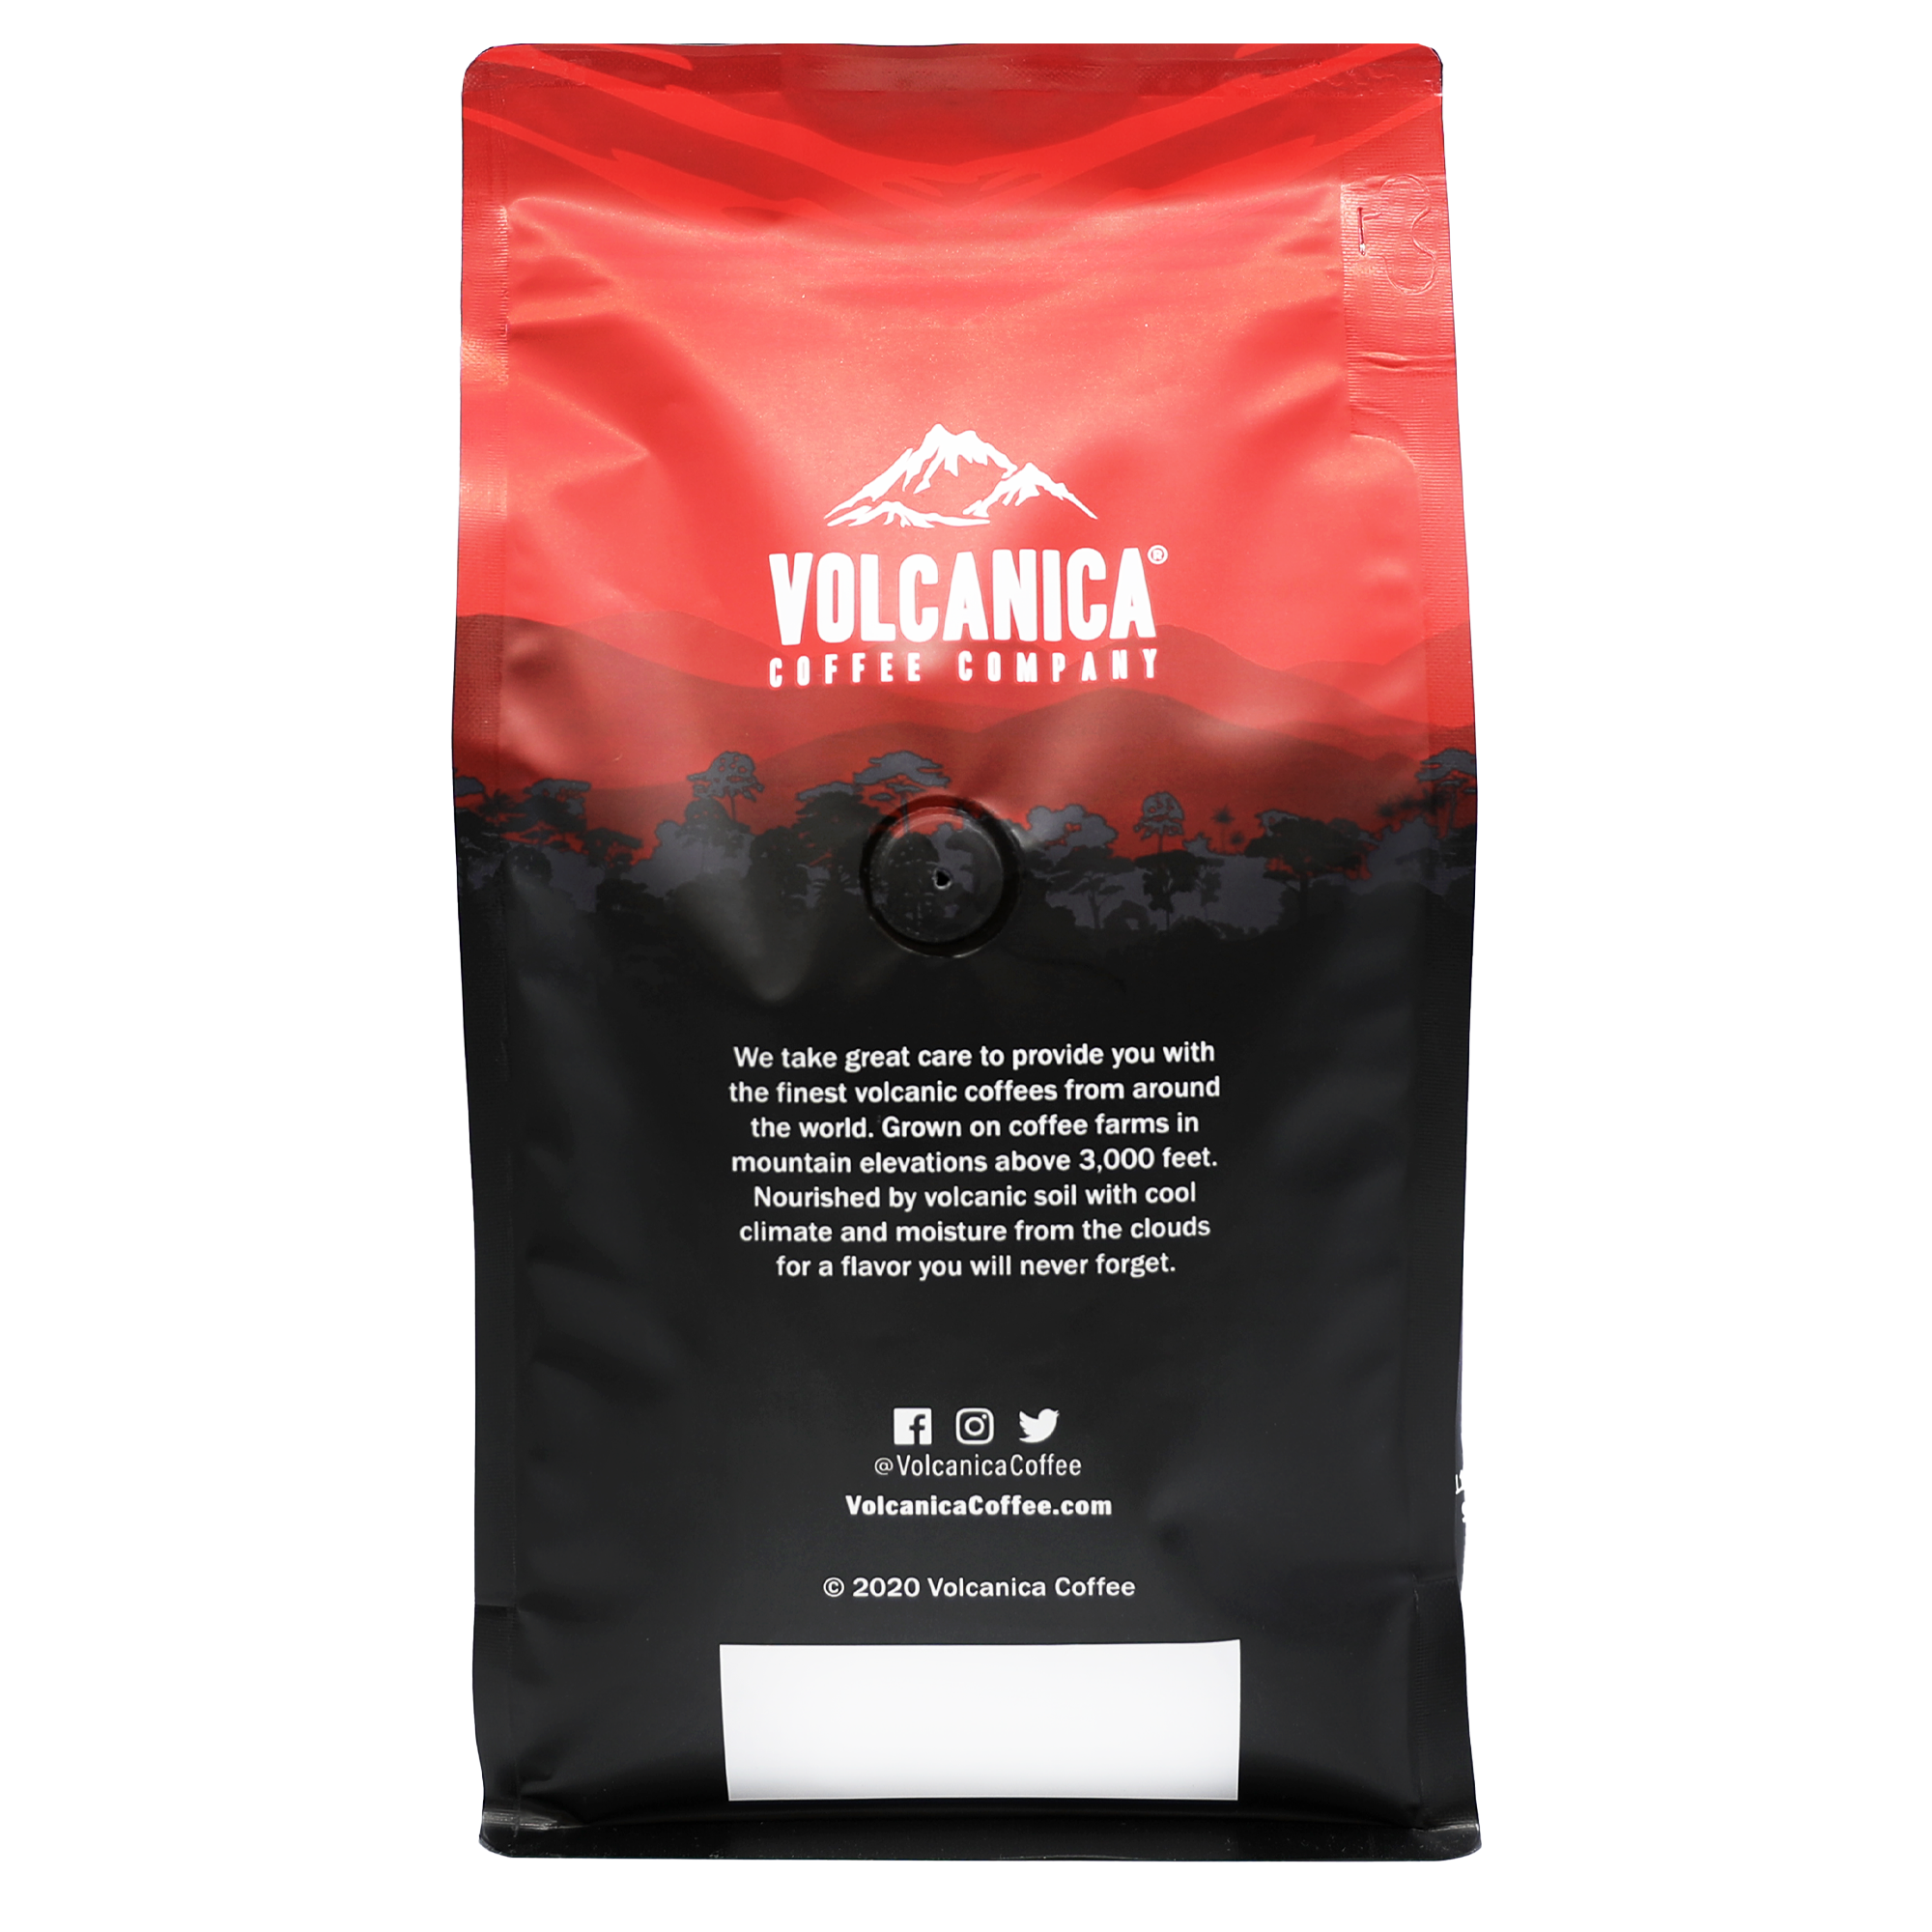 Snicker Doodle Cookie Flavored Decaf Coffee - Volcanica Coffee